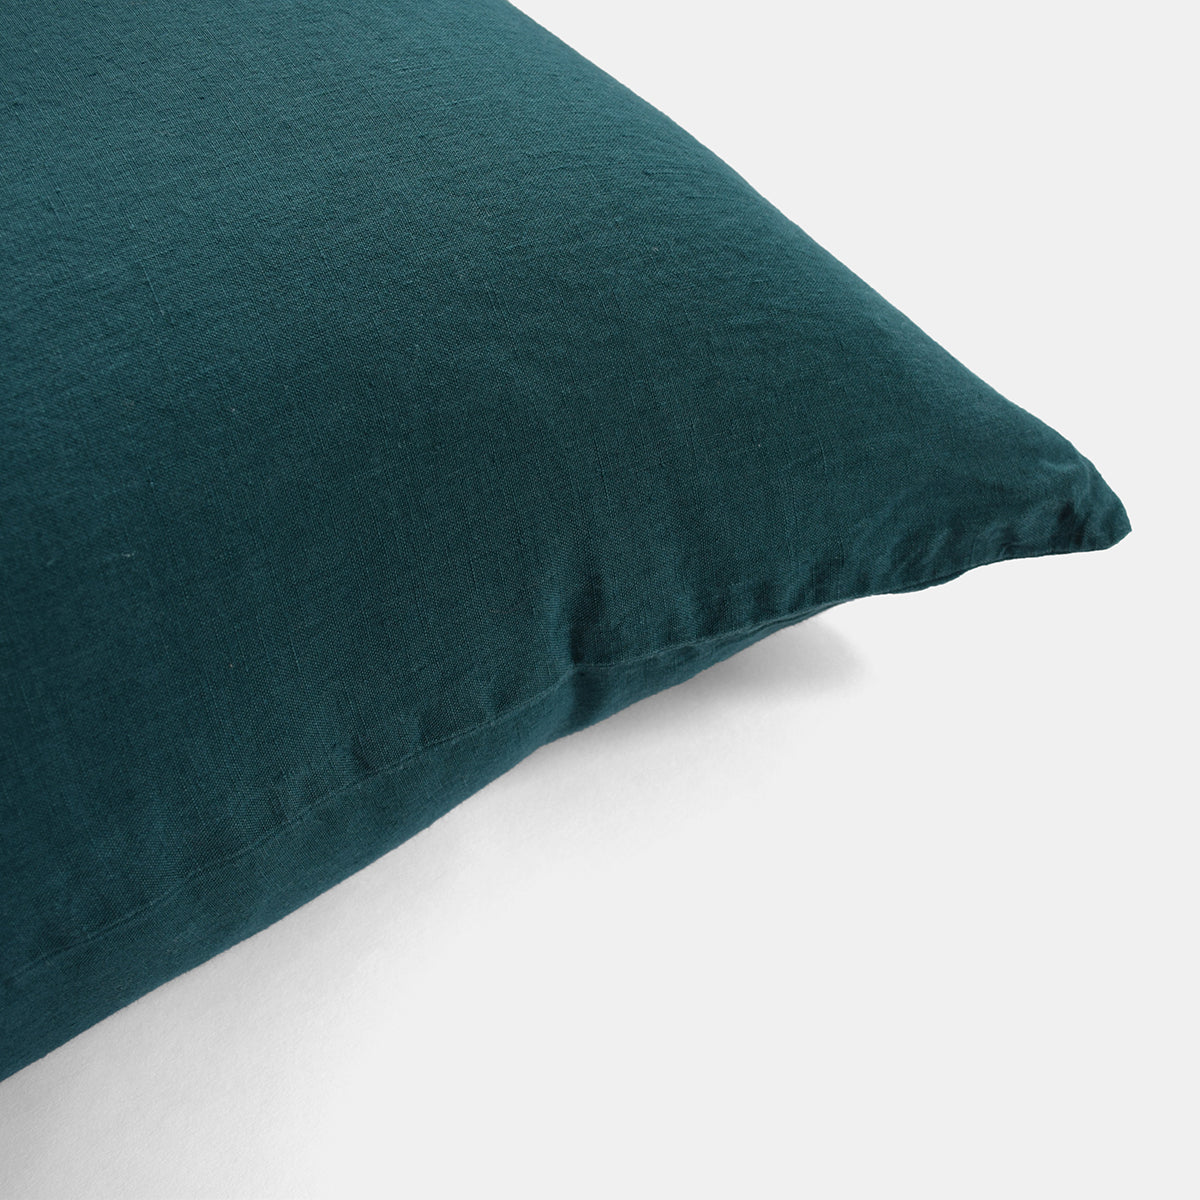 Linge Particulier Vintage Green Standard Linen Pillowcase Sham for a colorful linen bedding look in deep teal green - Collyer's Mansion